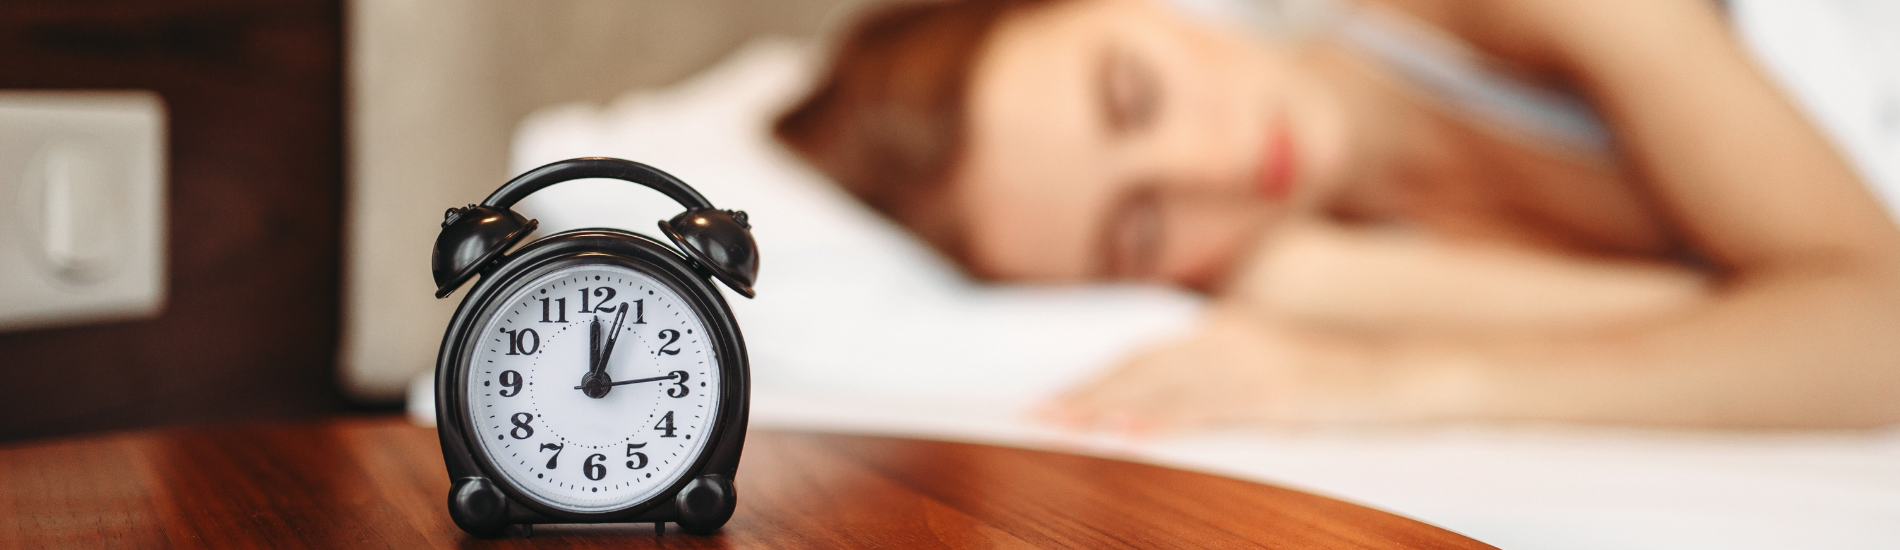 Lack of Sleep Isn’t the Only Explanation for Fatigue